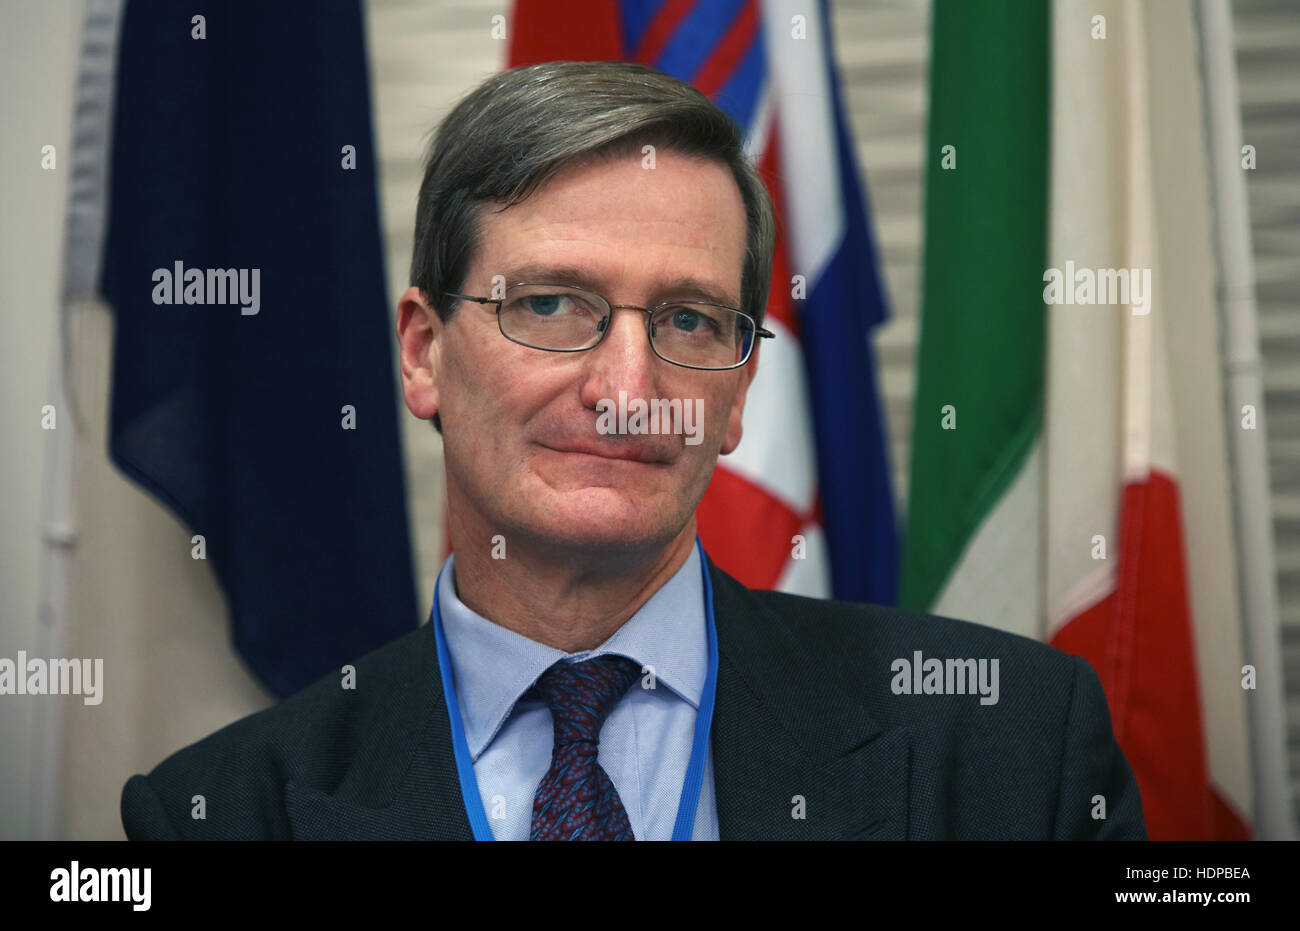 Europe and the People discussion at the Foreign Policy Exchange  Featuring: RT HON DOMINIC GRIEVE QC MP Where: London, United Kingdom When: 26 Oct 2016 Stock Photo